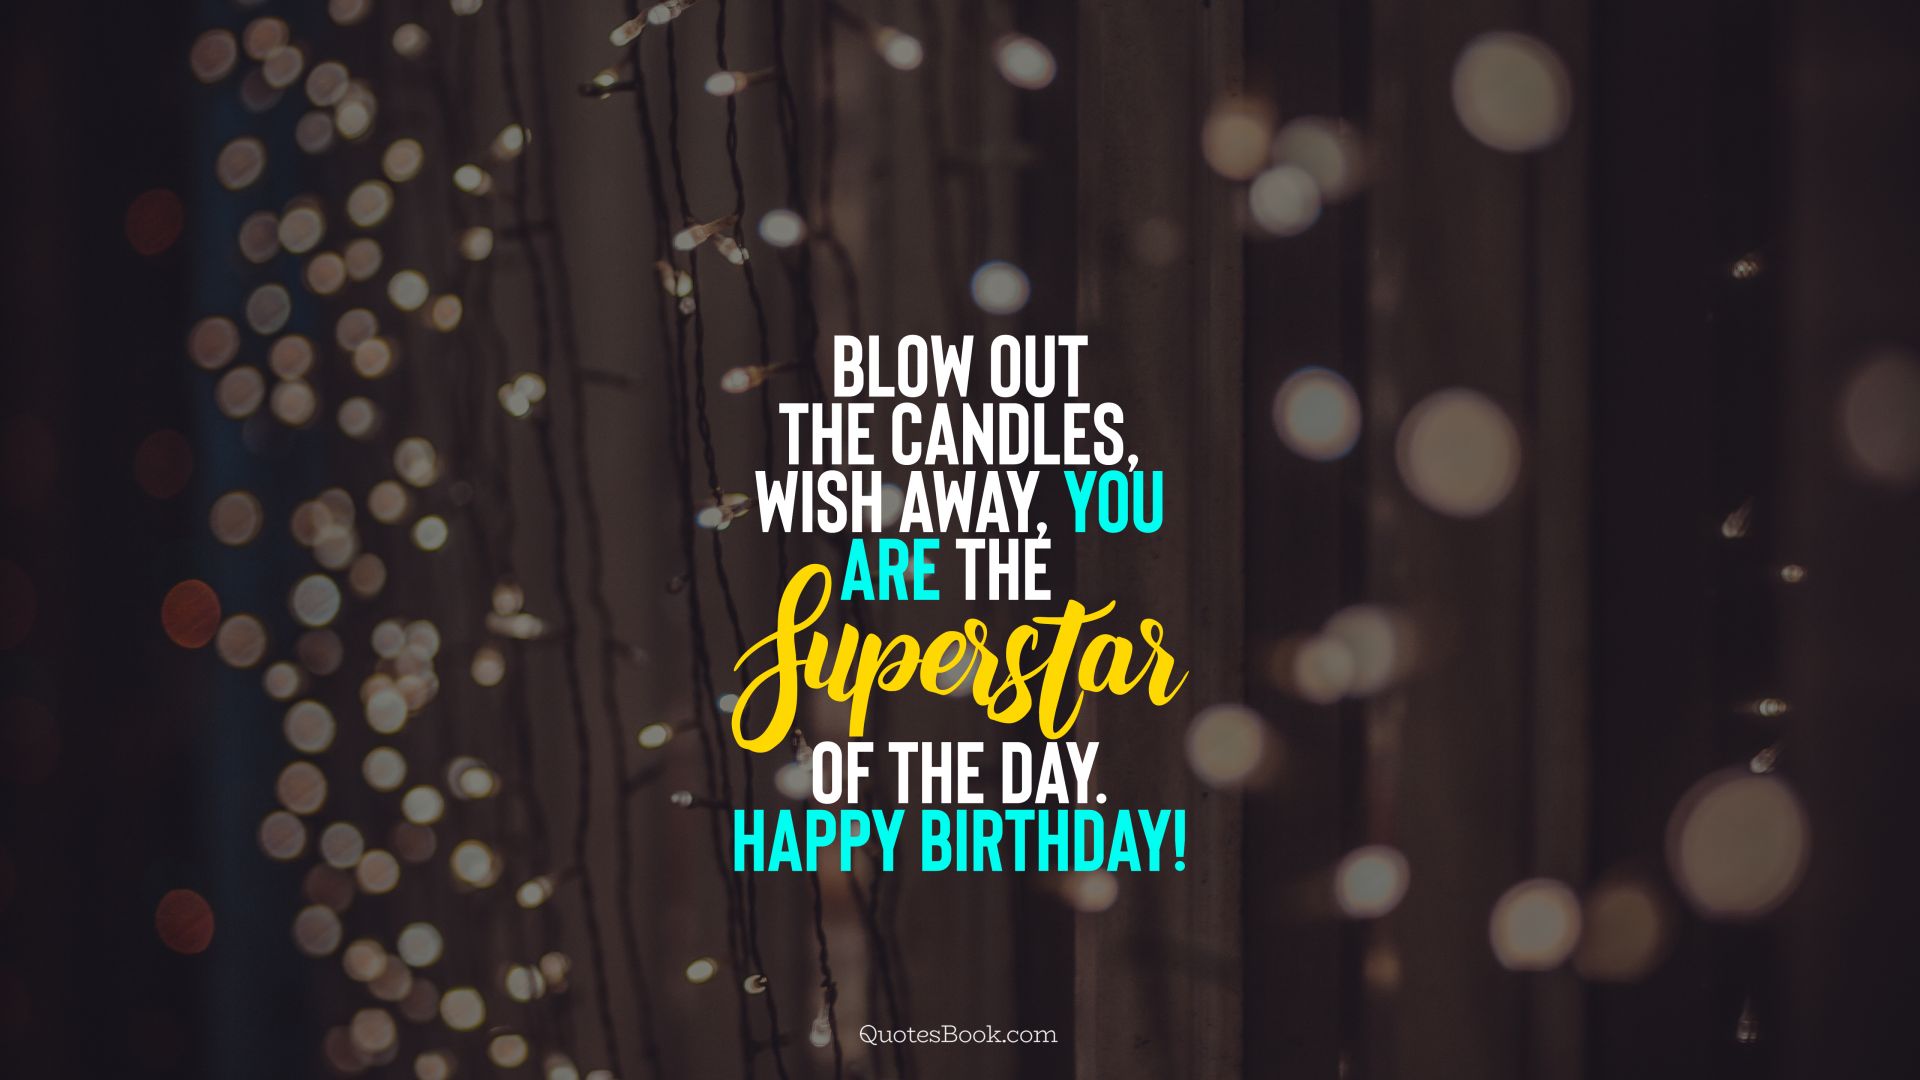 Blow out the candles, wish away, you are the superstar of the day. Happy Birthday!